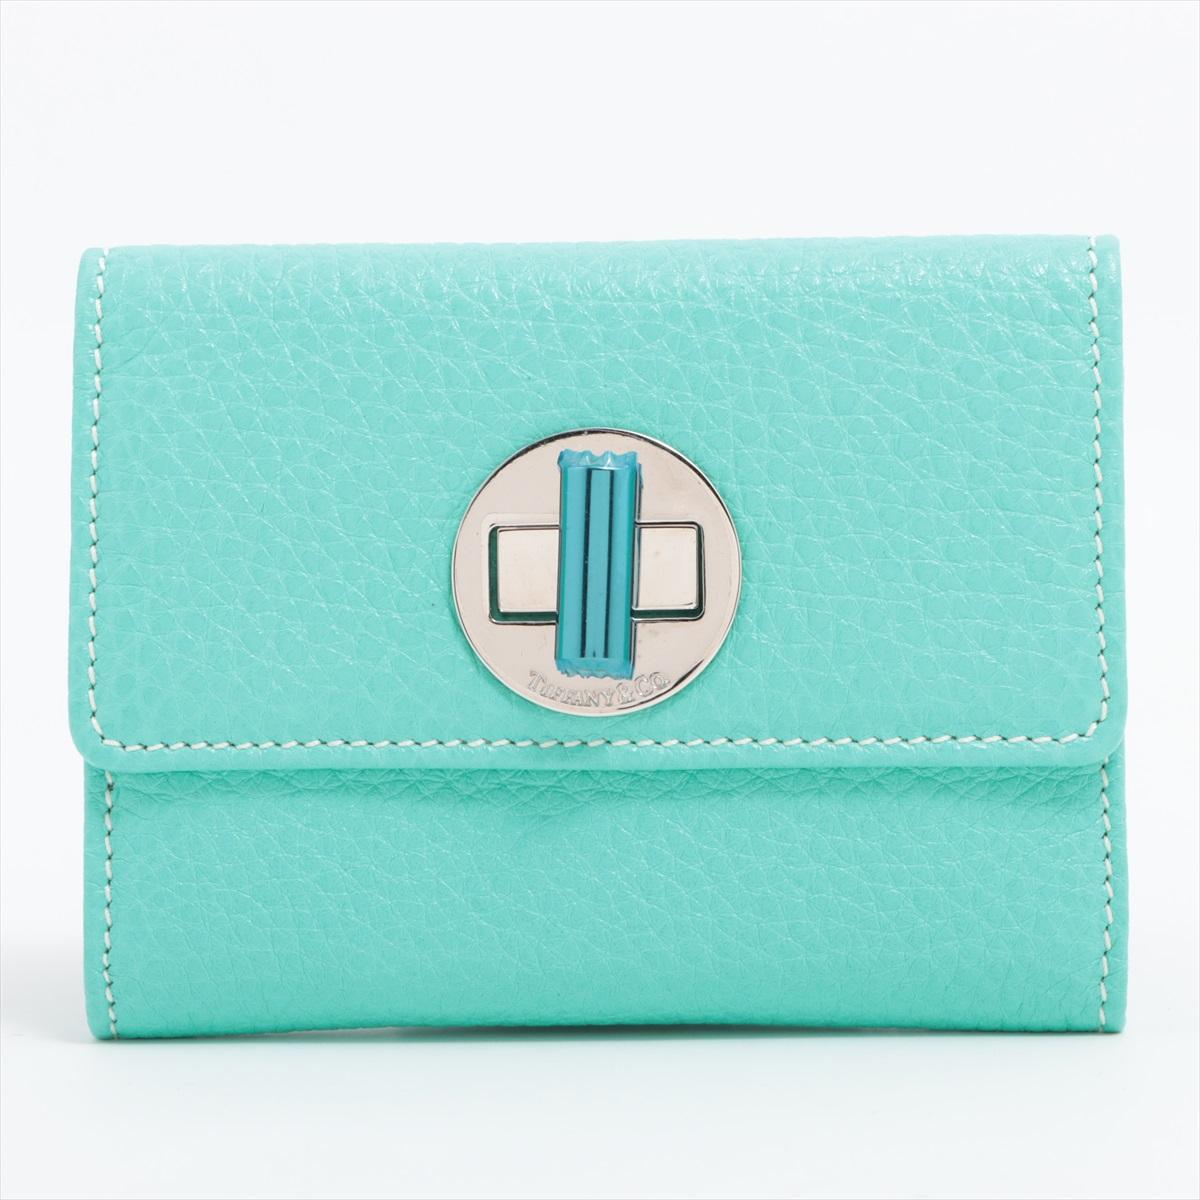 The Tiffany & Co Twist-lock Leather Coin Purse in Blue is a refined and compact accessory that seamlessly blends luxury with practicality. Crafted from smooth leather, the coin purse features a sophisticated twist-lock closure adorned with the